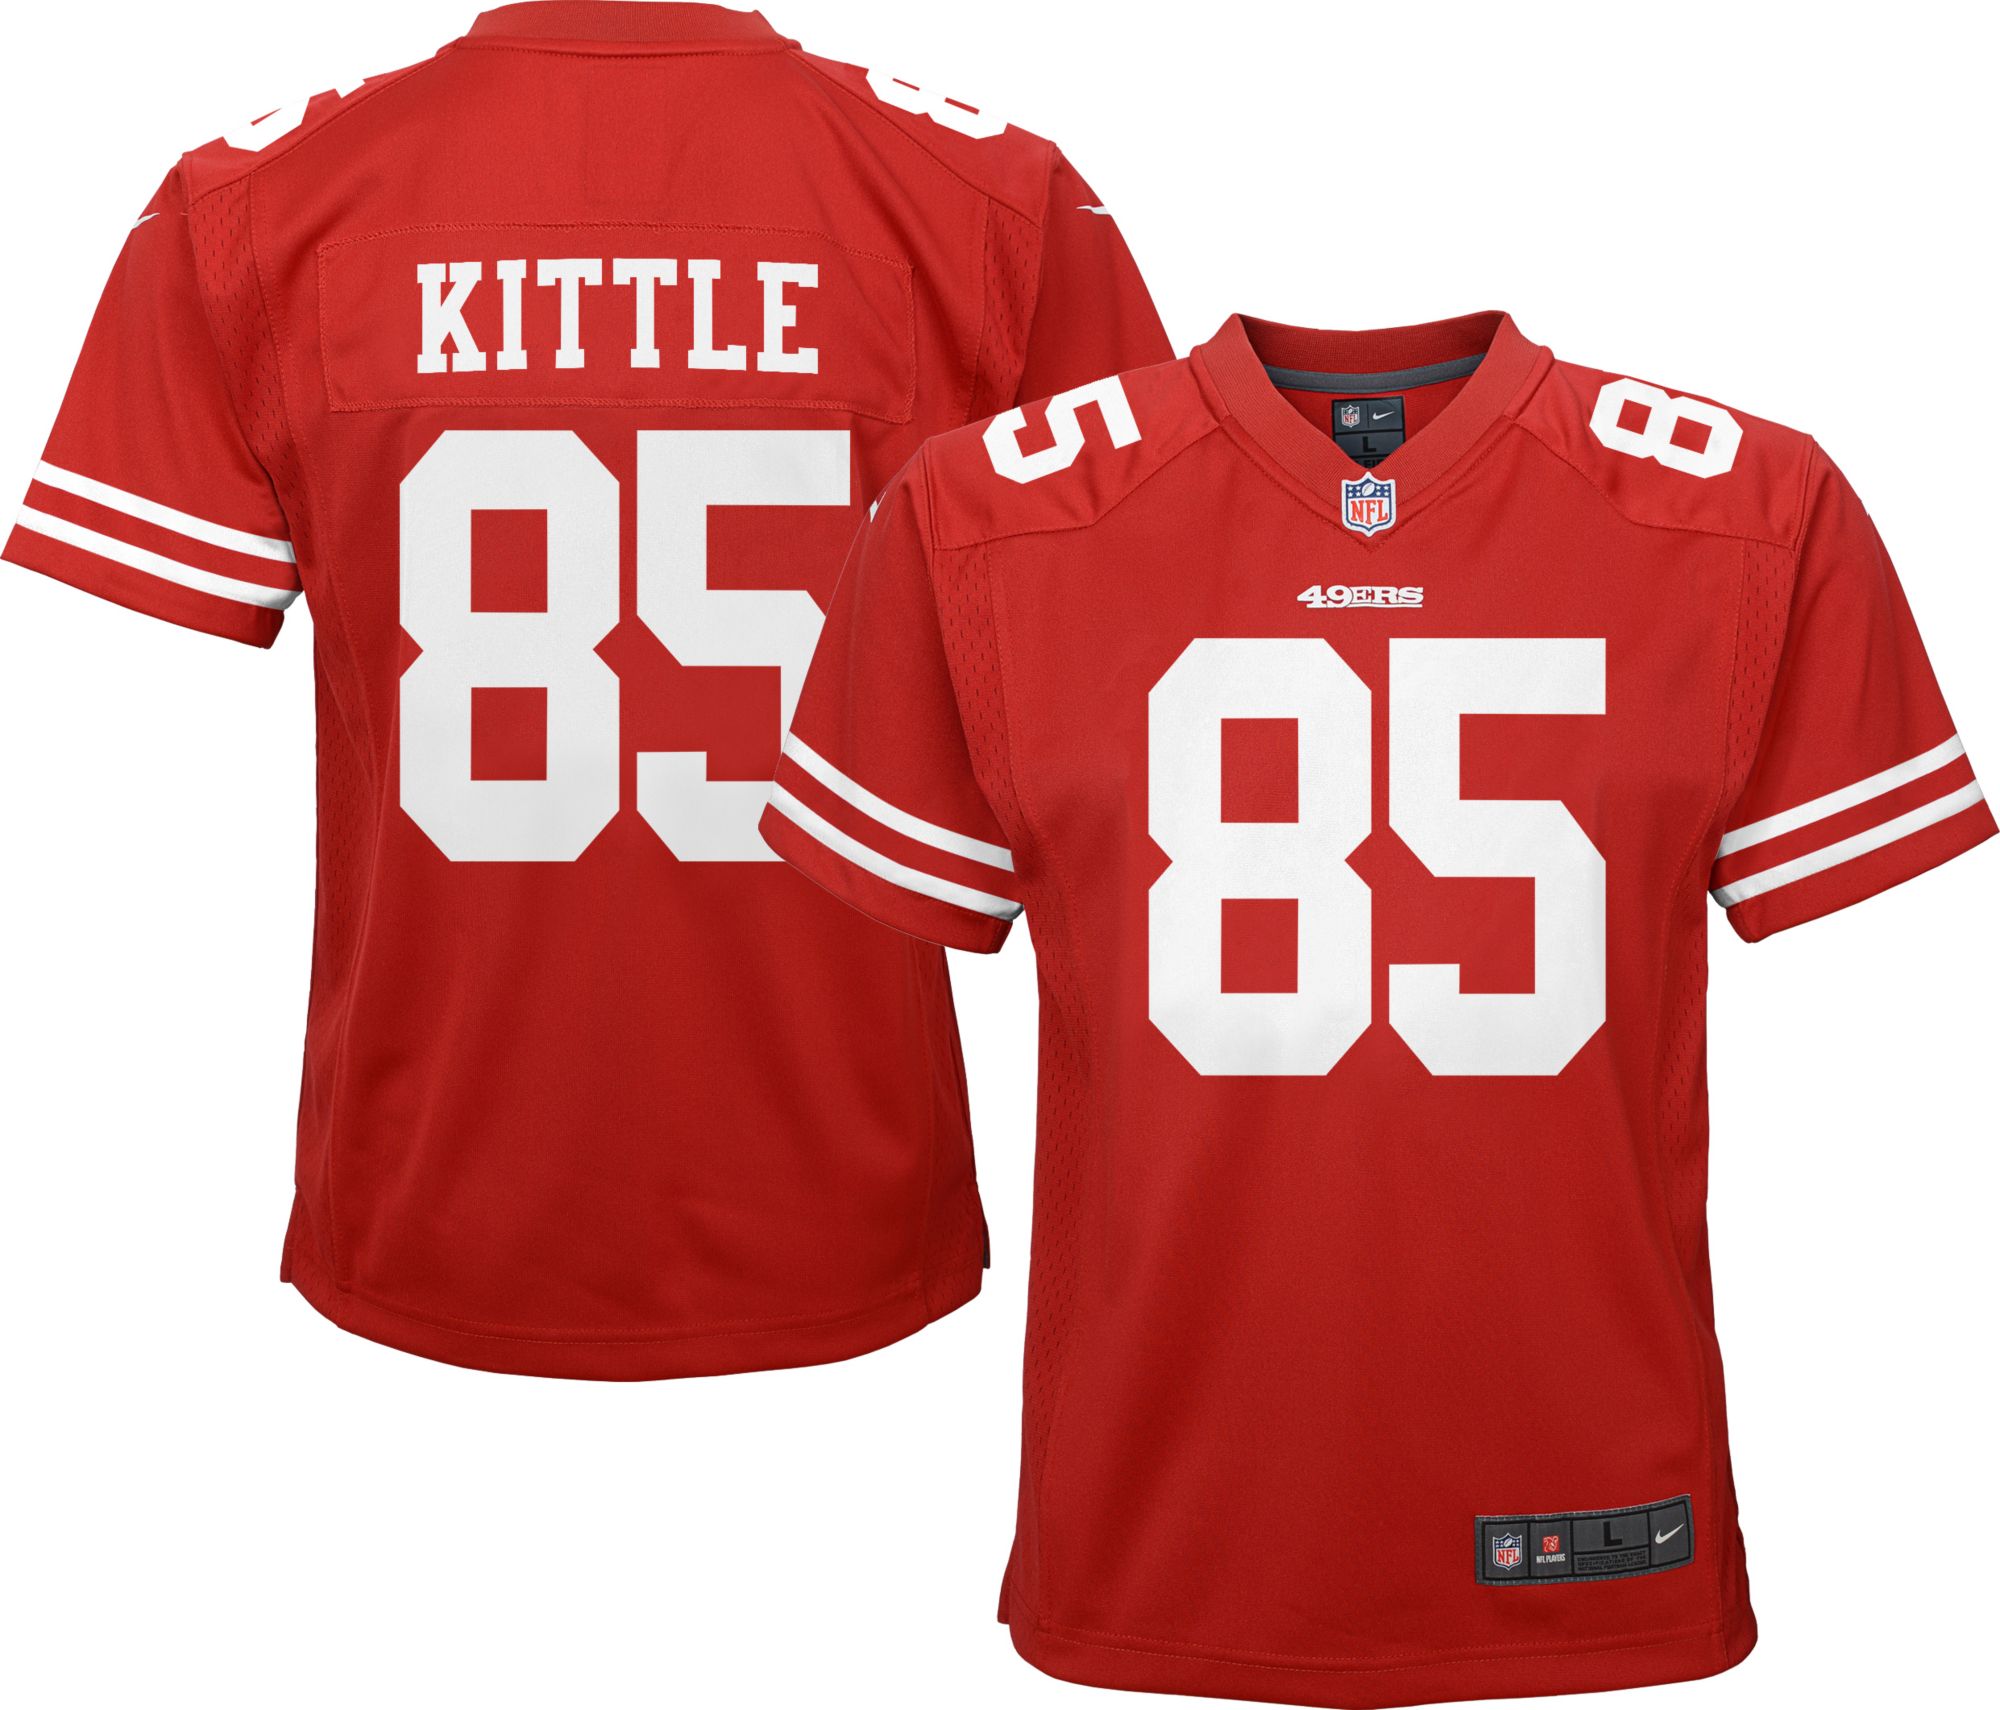 49ers clothes for toddlers